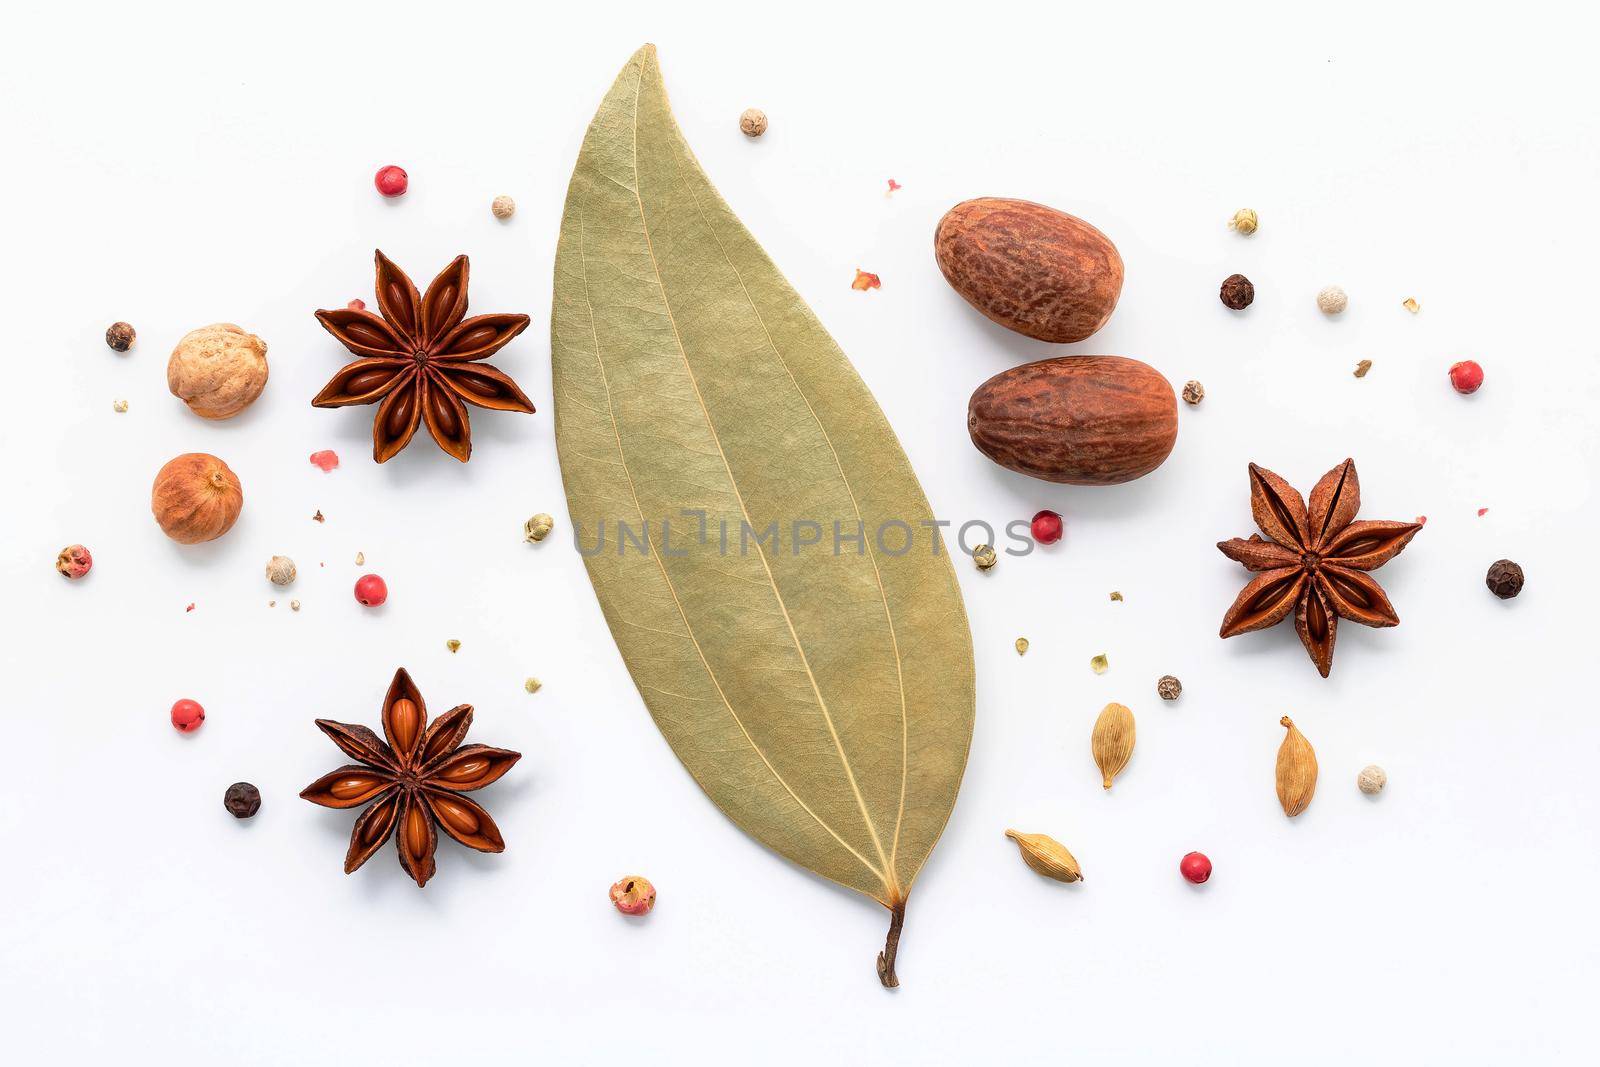 Cinnamon sticks, star anise and spices isolated on white background.